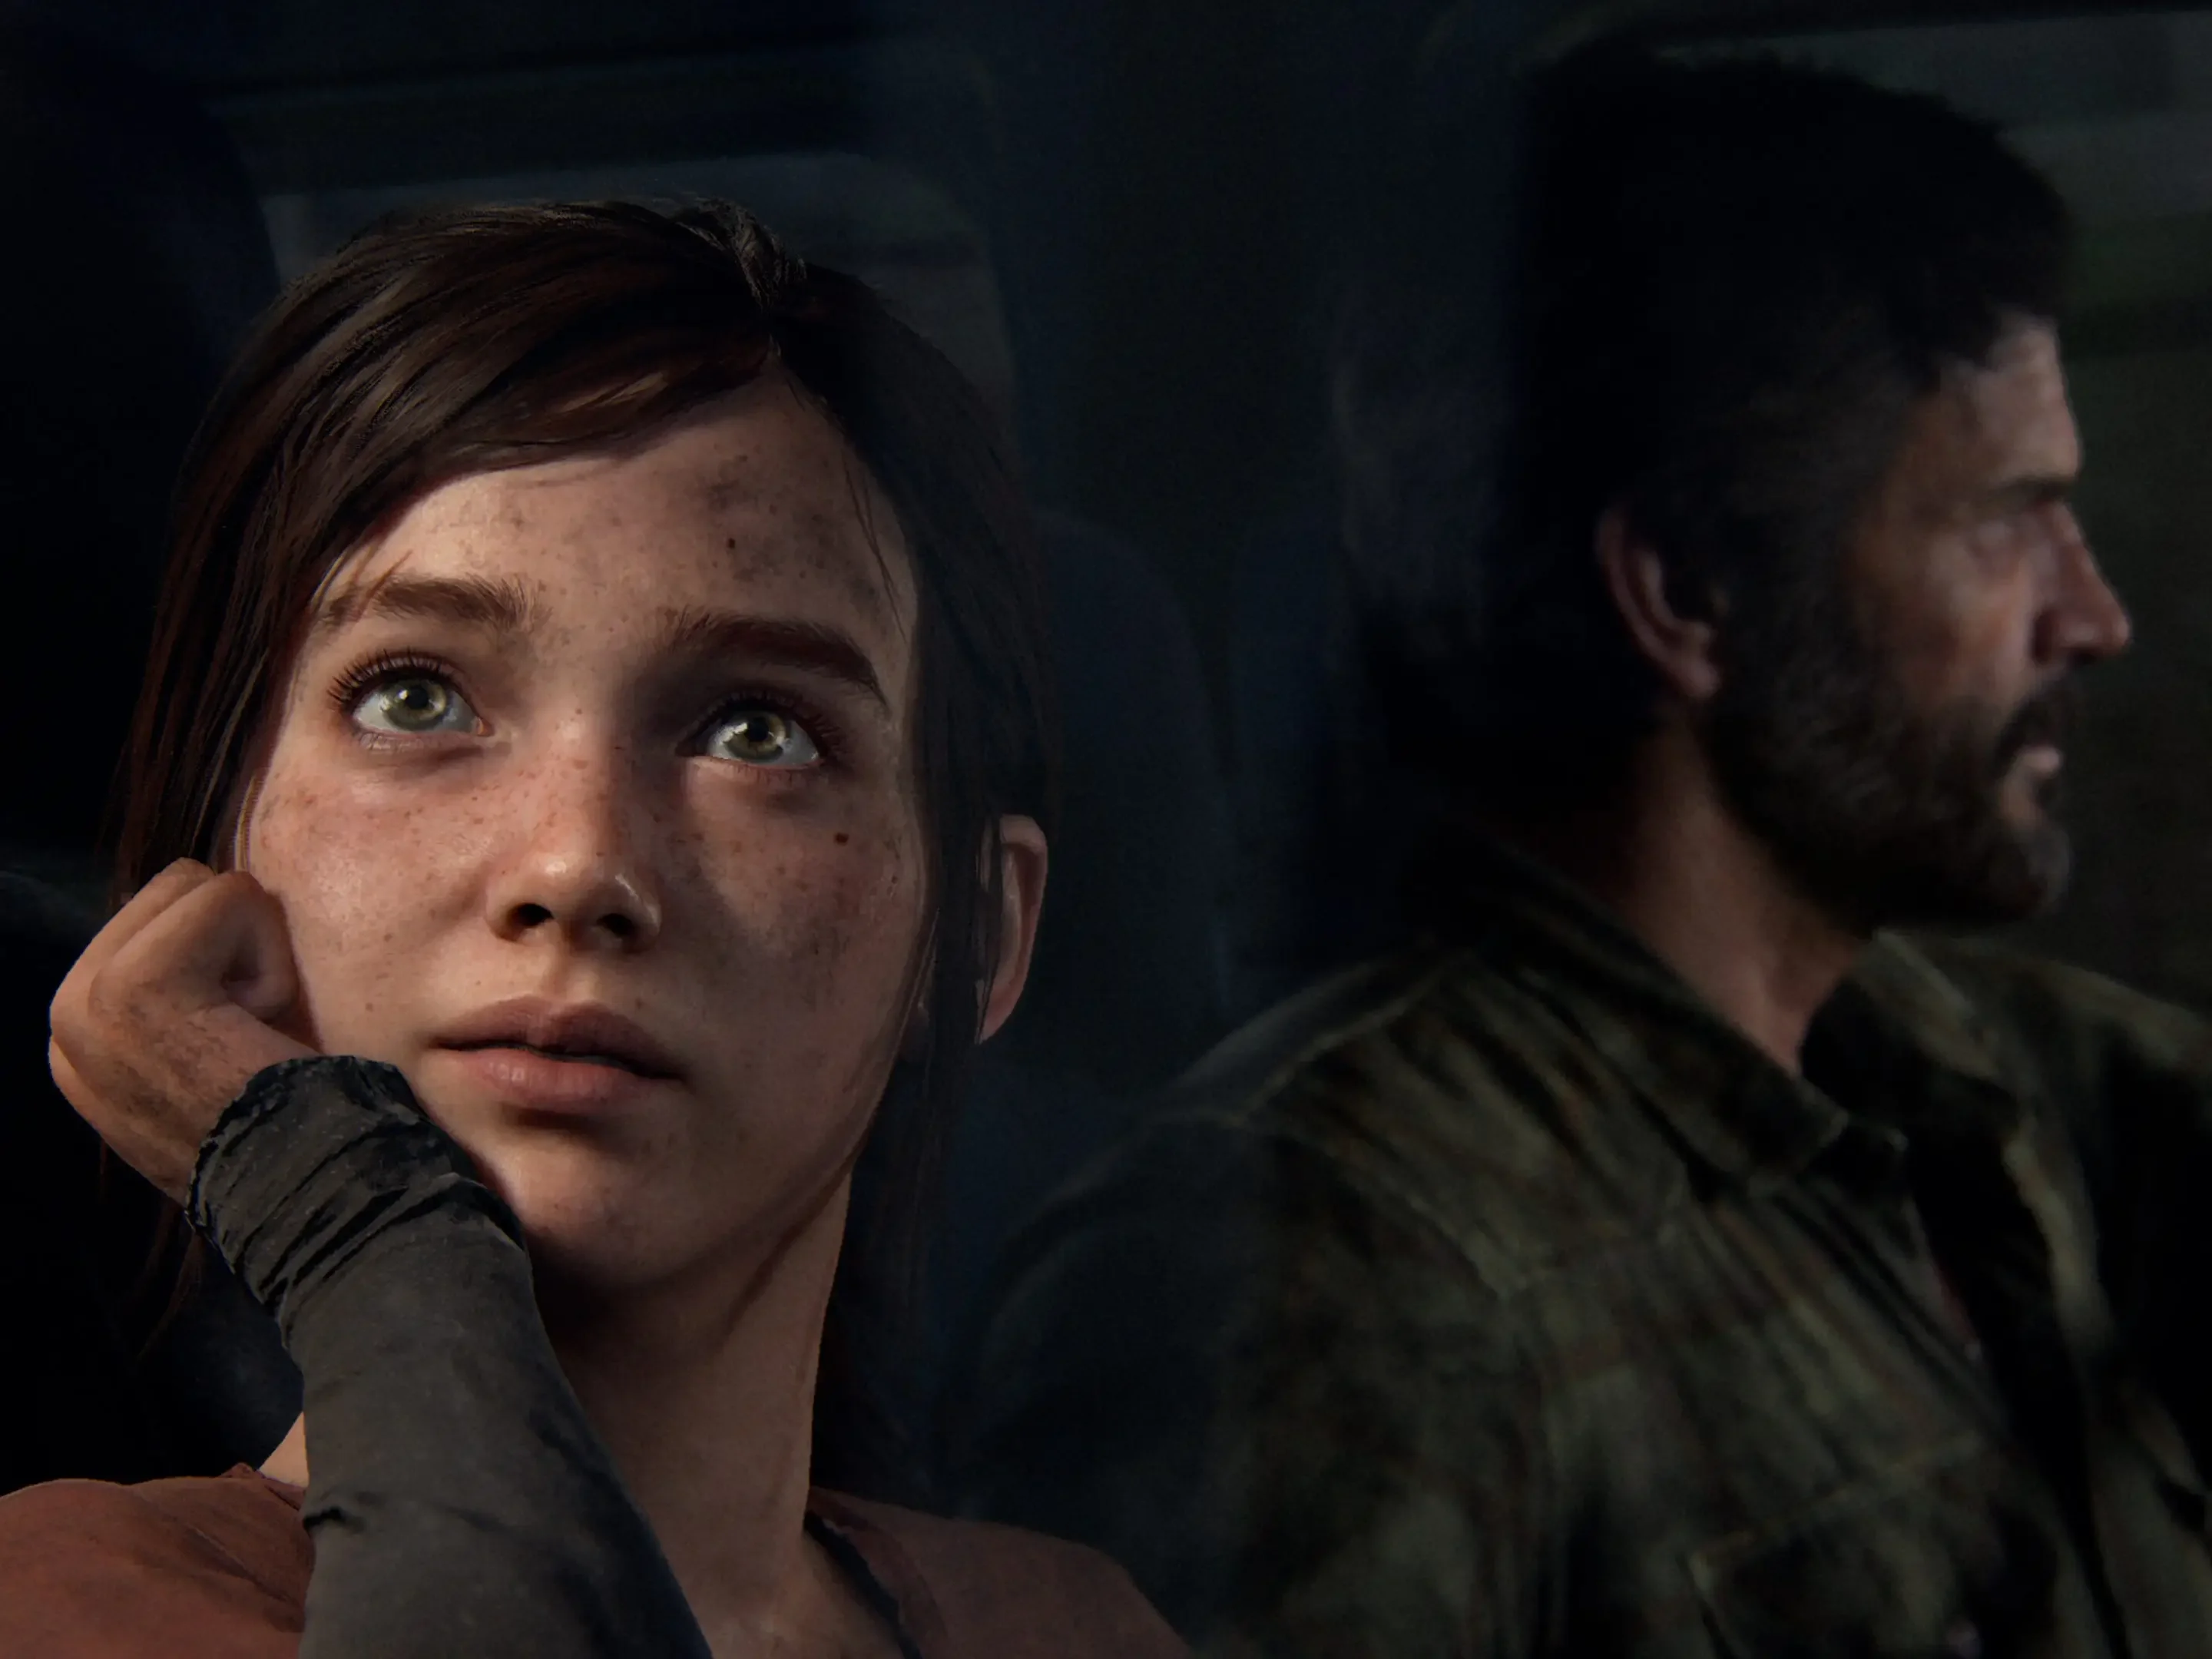 The creators of The Last of Us shared the features of the PC version of the game